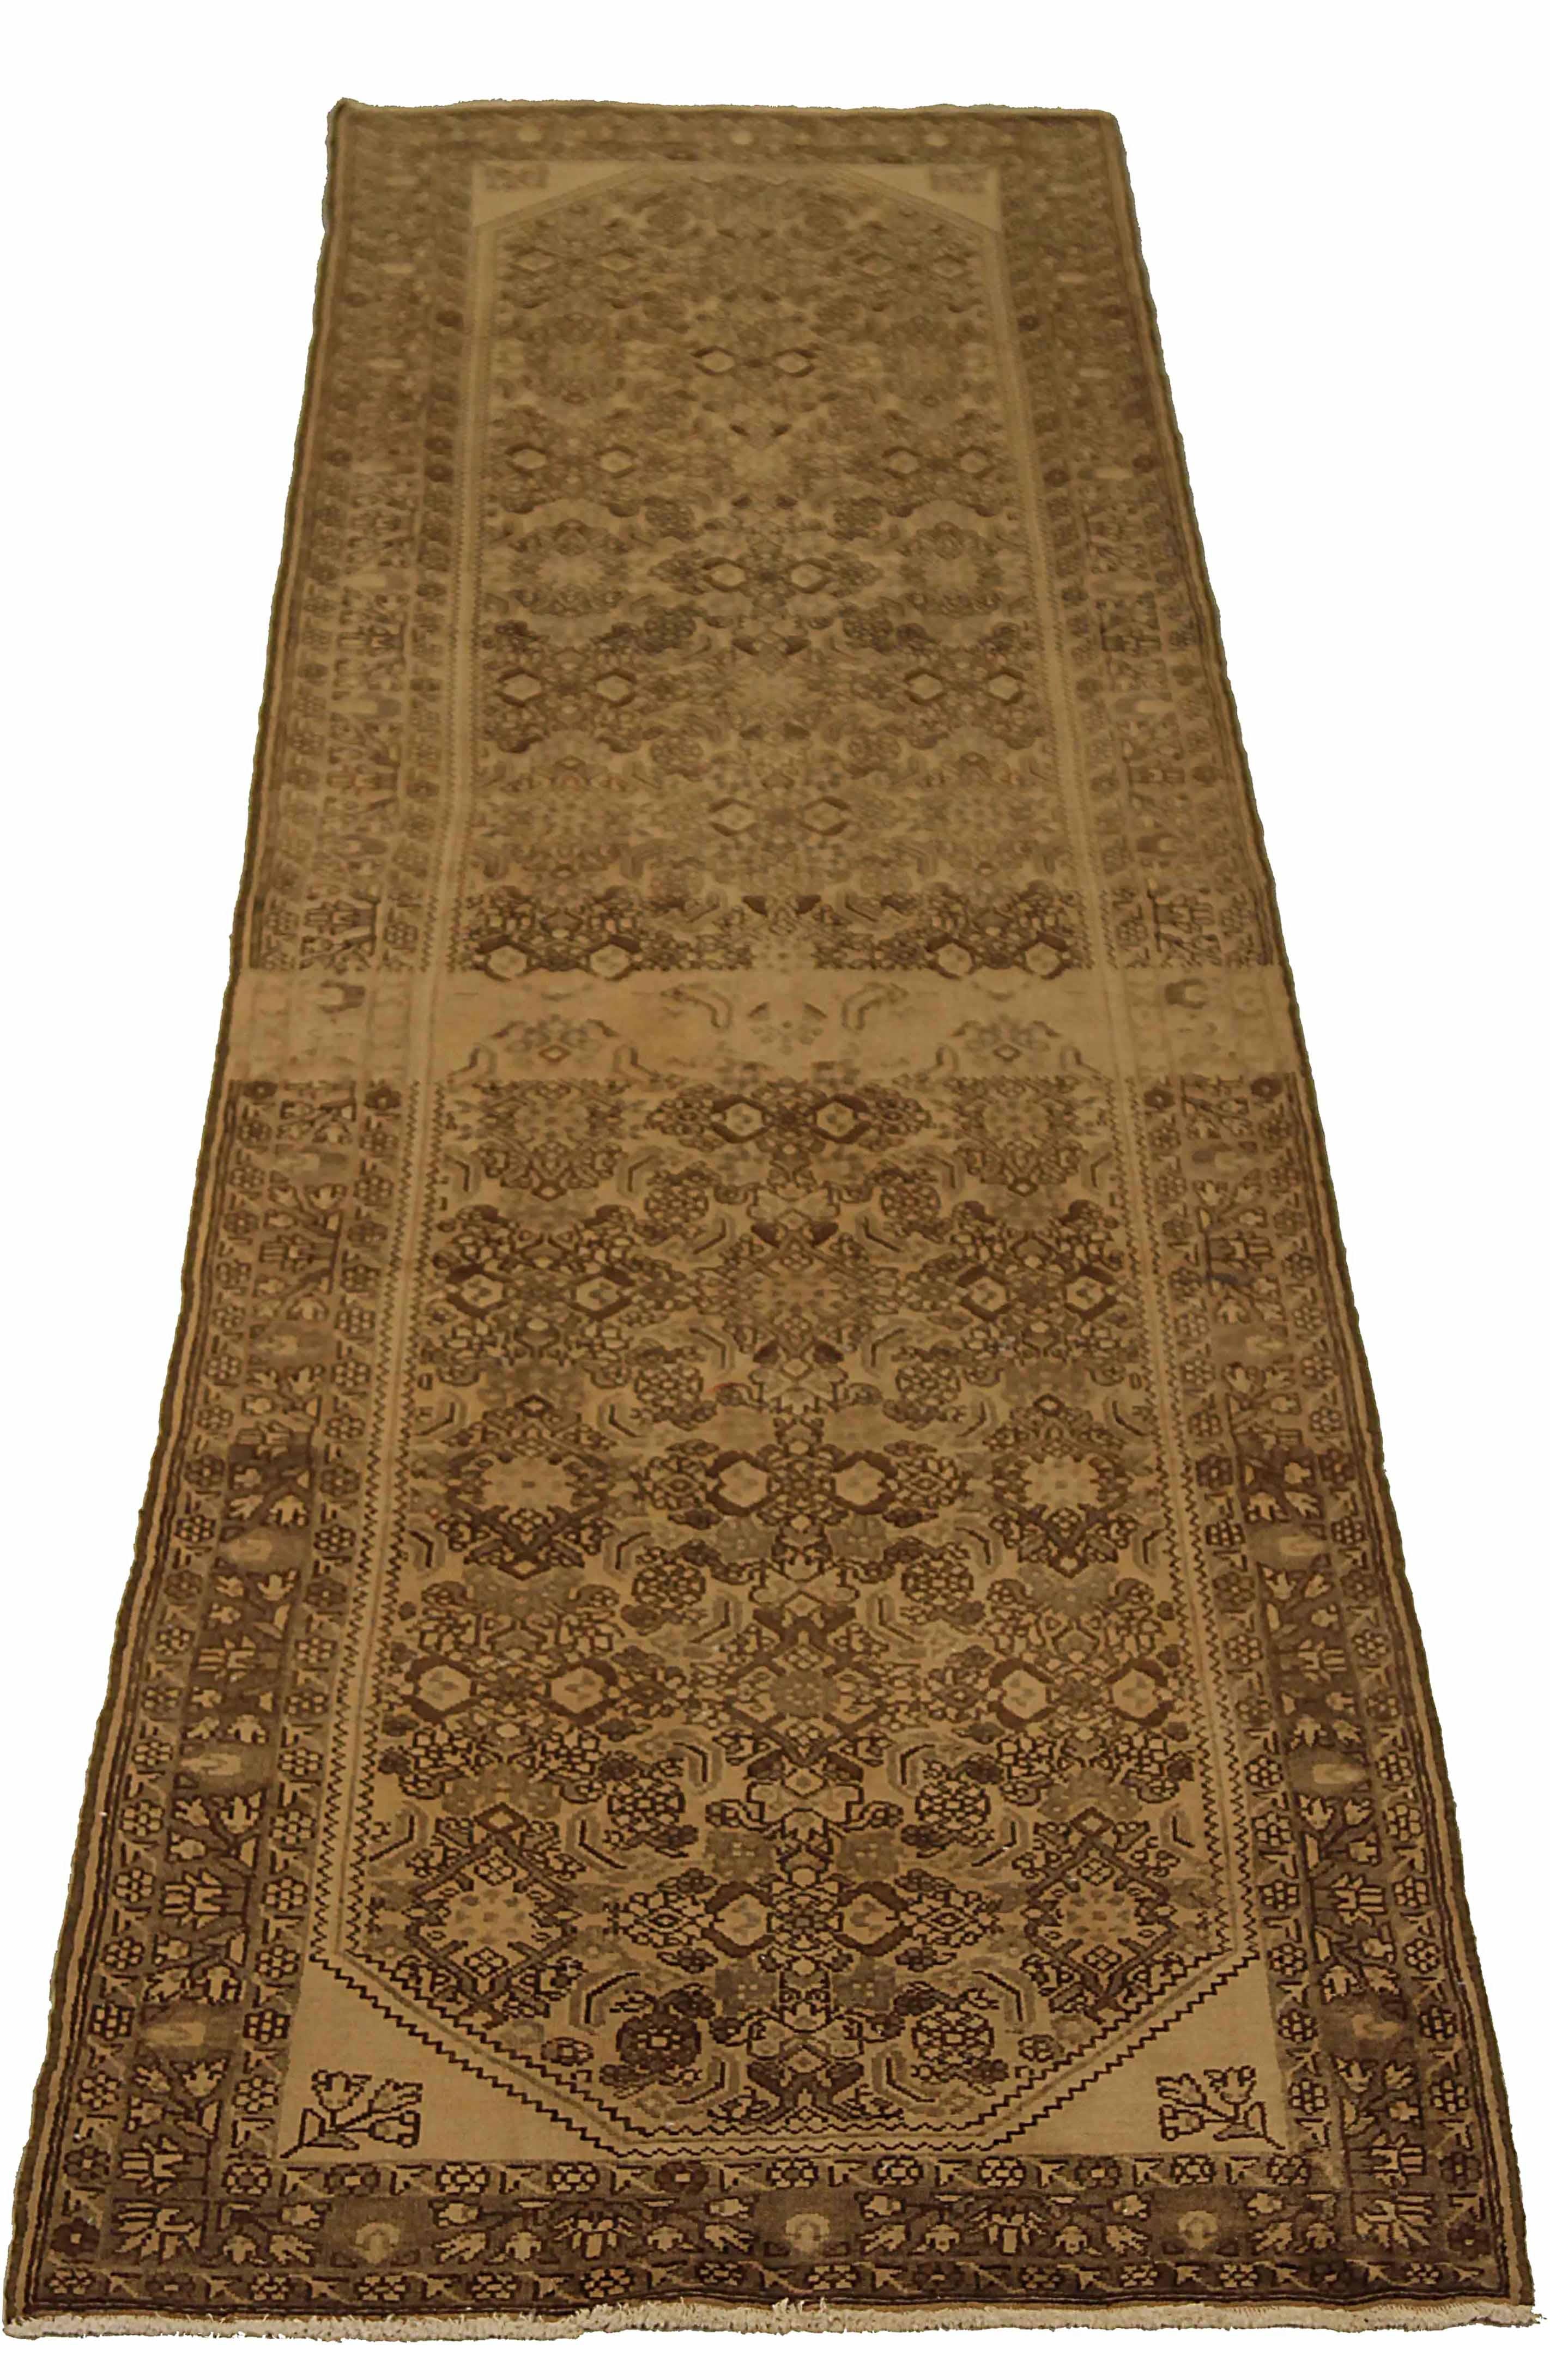 Antique Persian runner rug handwoven from the finest sheep’s wool. It’s colored with all-natural vegetable dyes that are safe for humans and pets. It’s a traditional Hamedan design handwoven by expert artisans. It’s a lovely runner rug that can be